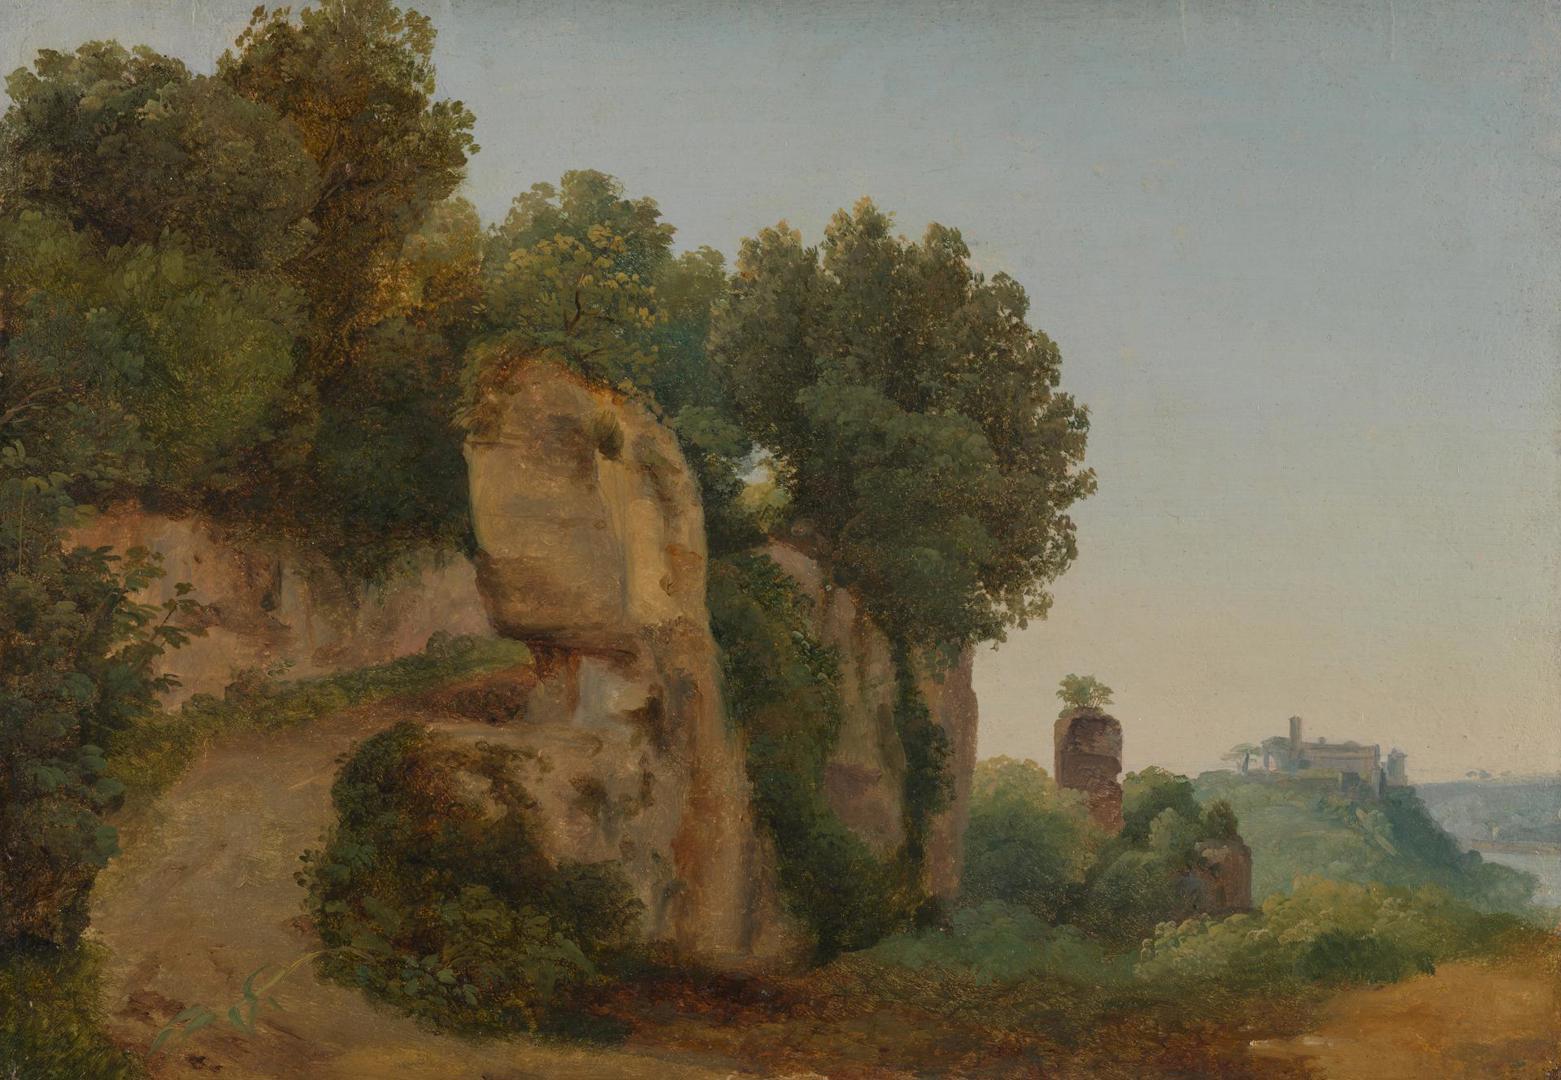 View of the Aventine Hill from the Palatine by Anton Sminck van Pitloo